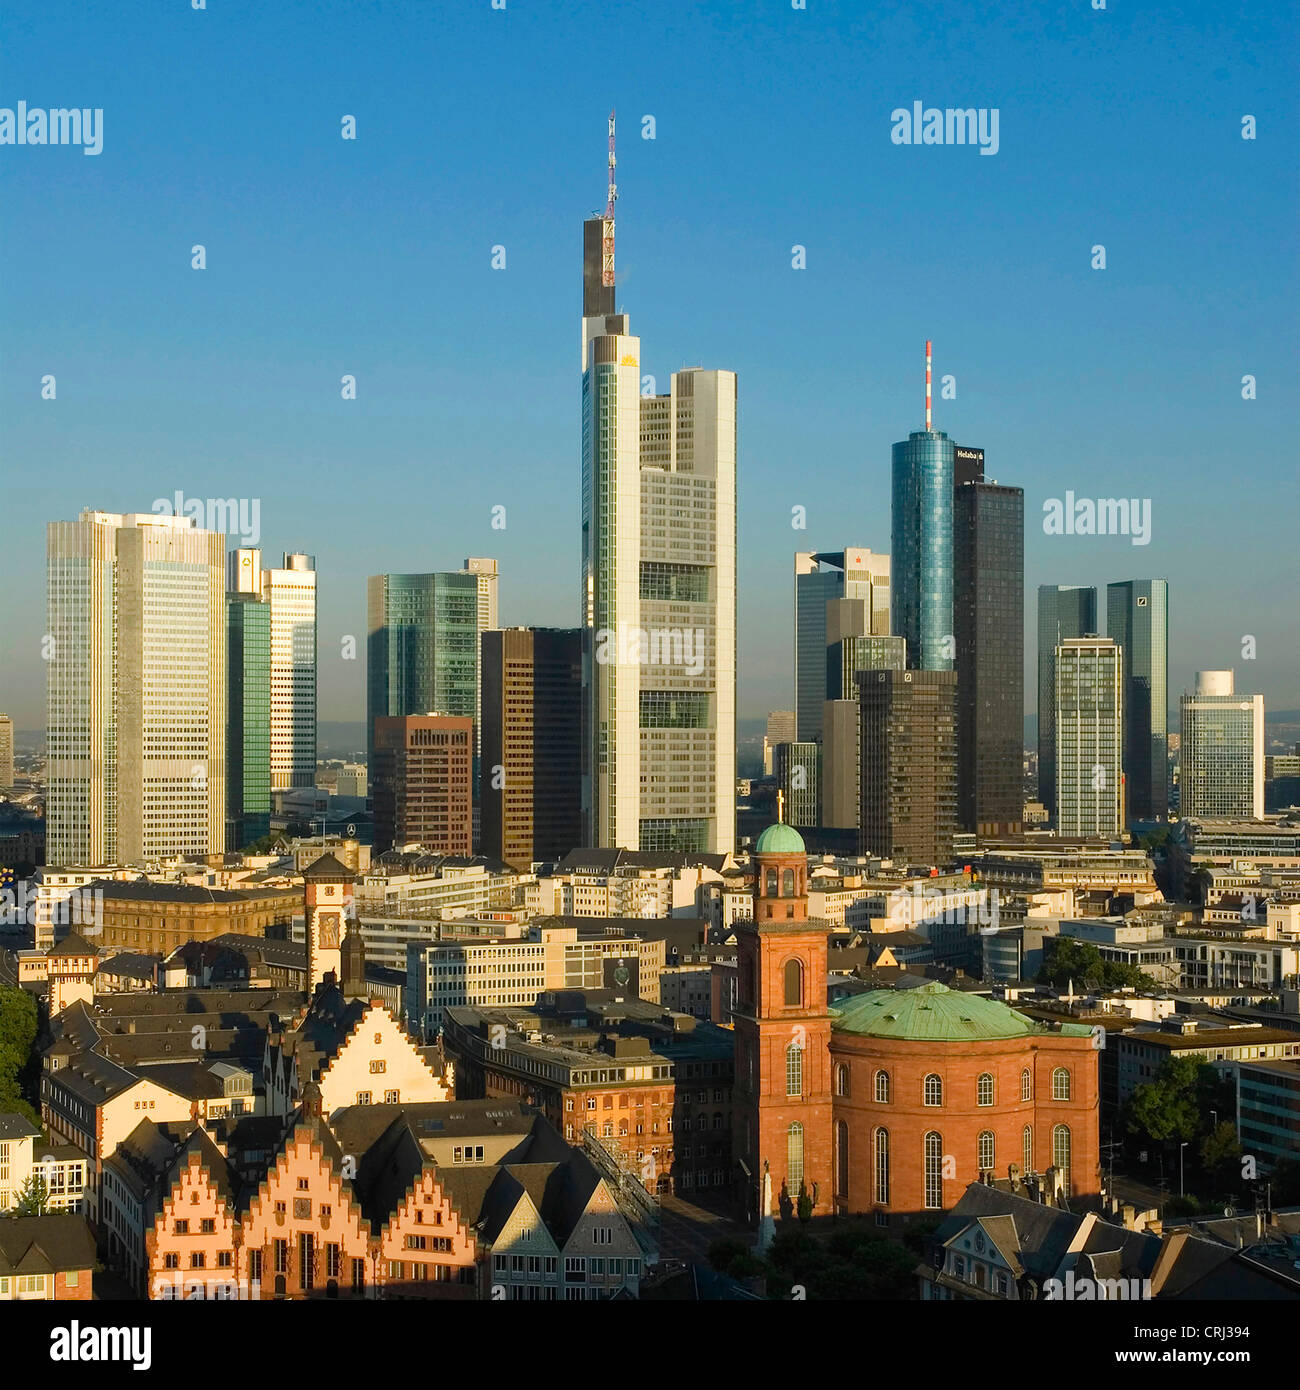 Pauls church with financial district in background, Germany, Hesse, Frankfurt am Main Stock Photo